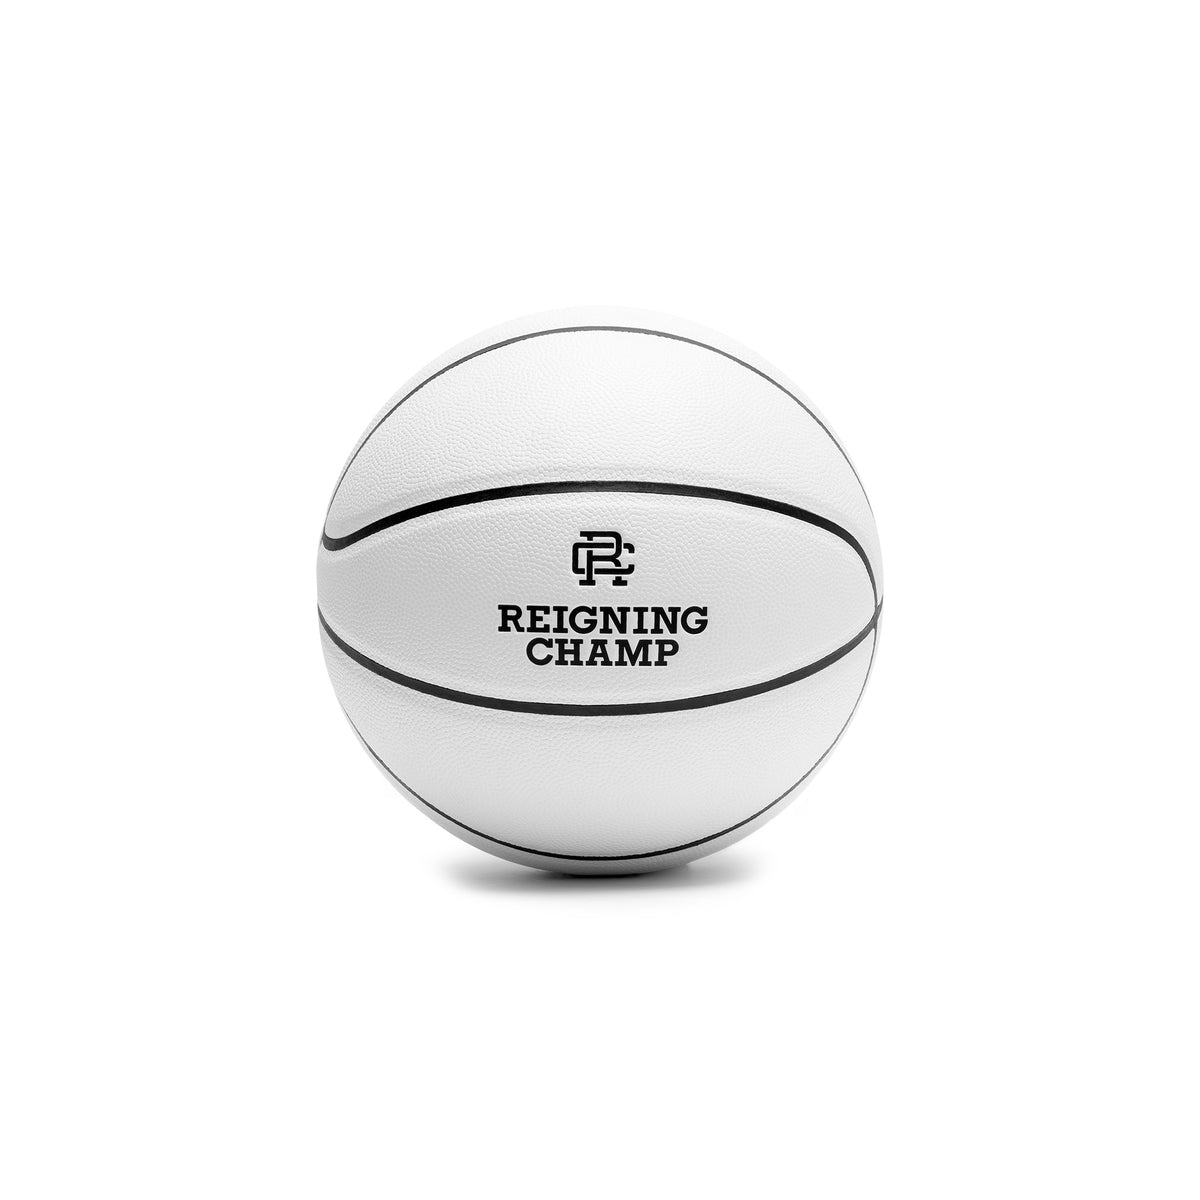 Spalding Basketball / O/S / Grey by Reigning Champ